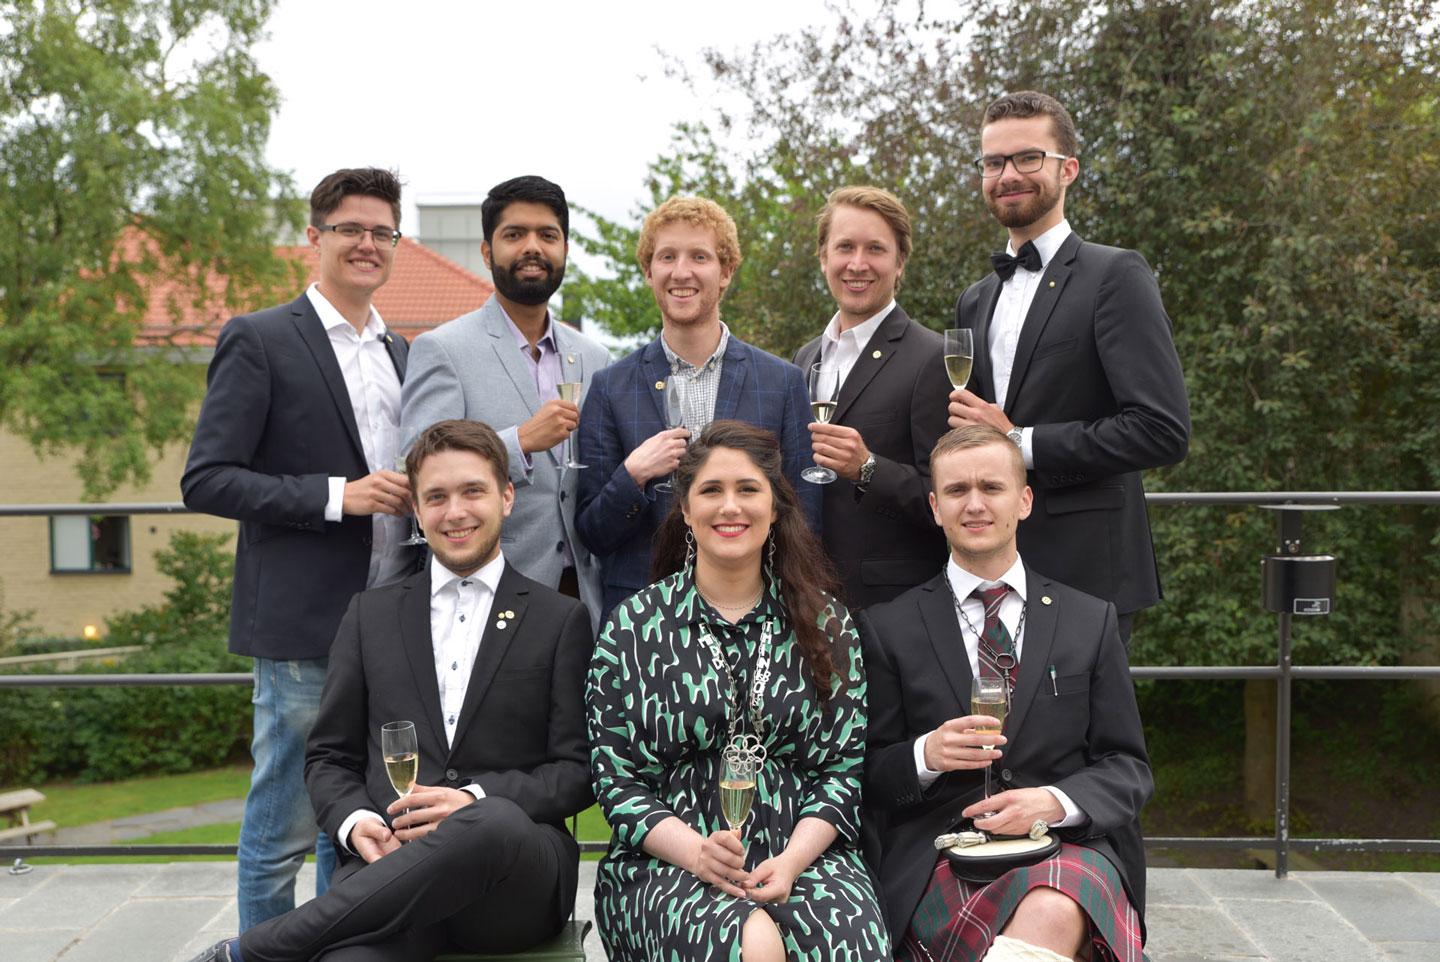 Group of smiling people dressed in party attire posing outdoors with champagne glasses.